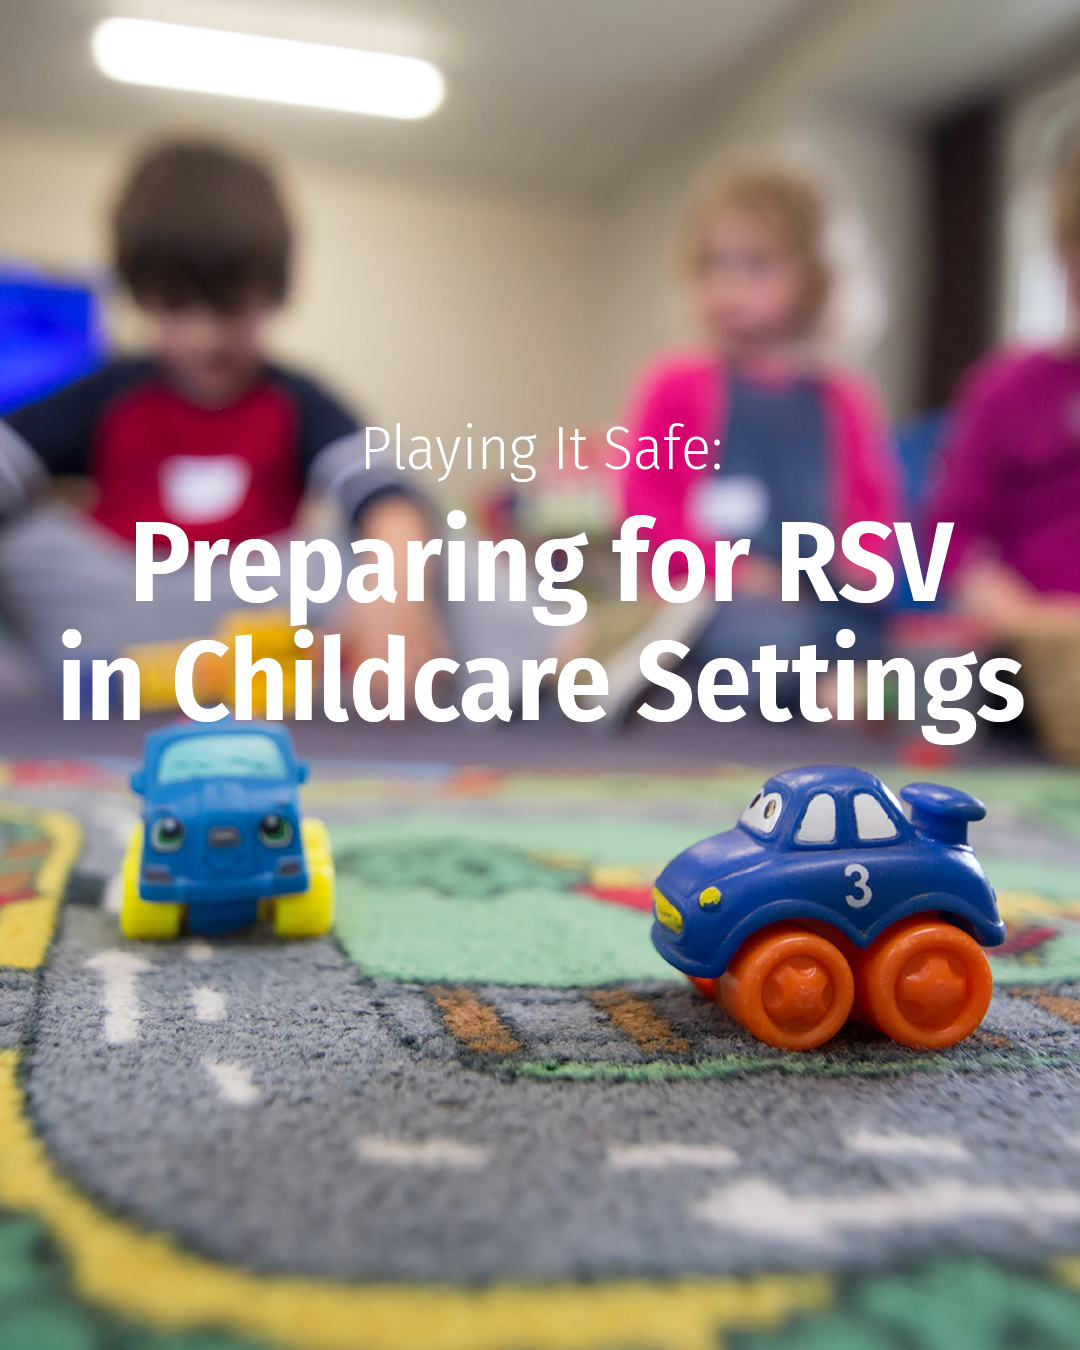 How To Clean and Disinfect Early Care and Education Settings